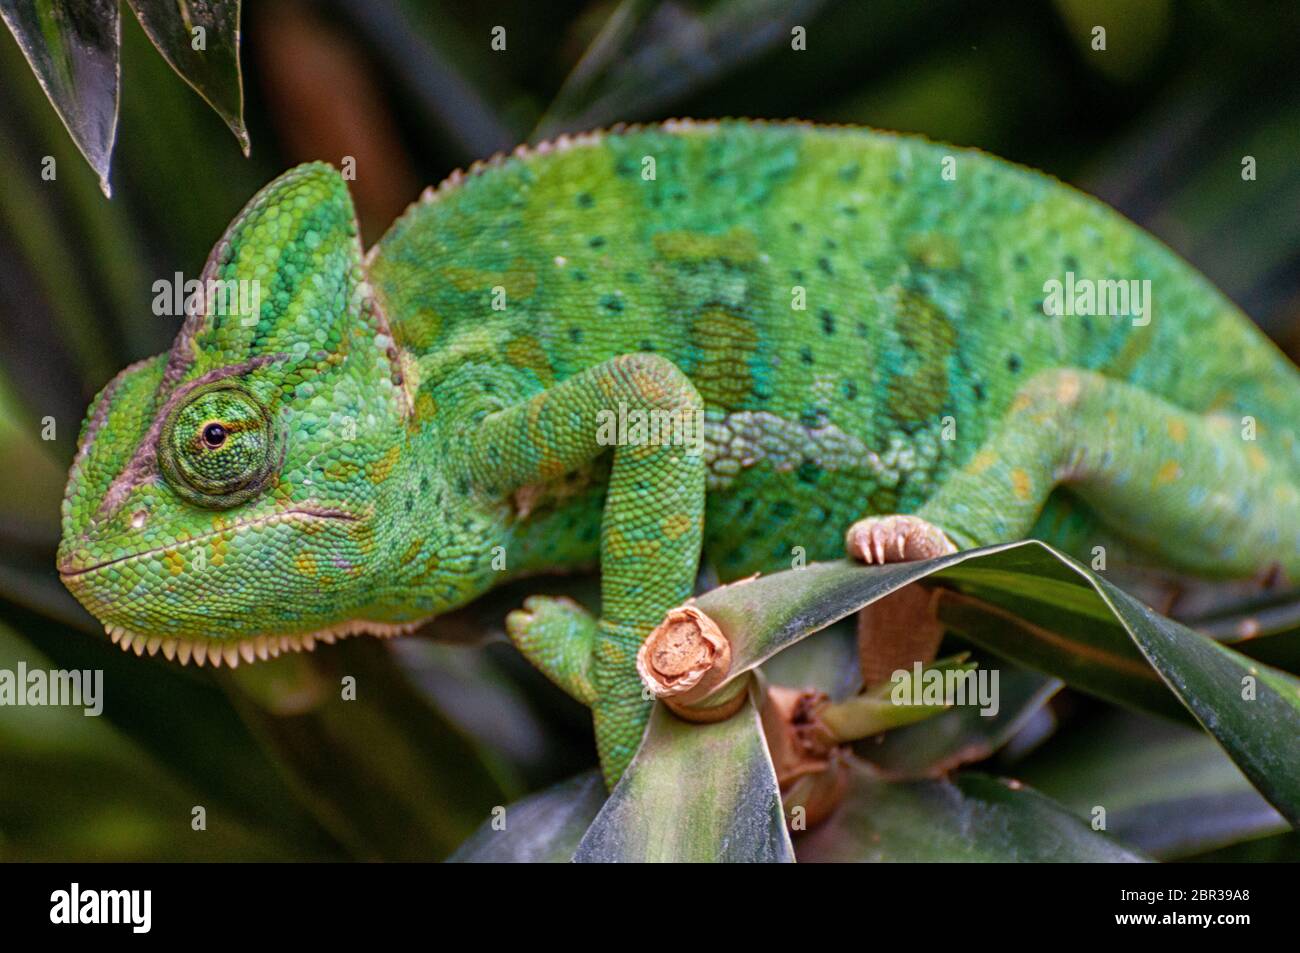 a green panther chameleon on a leaf Stock Photo